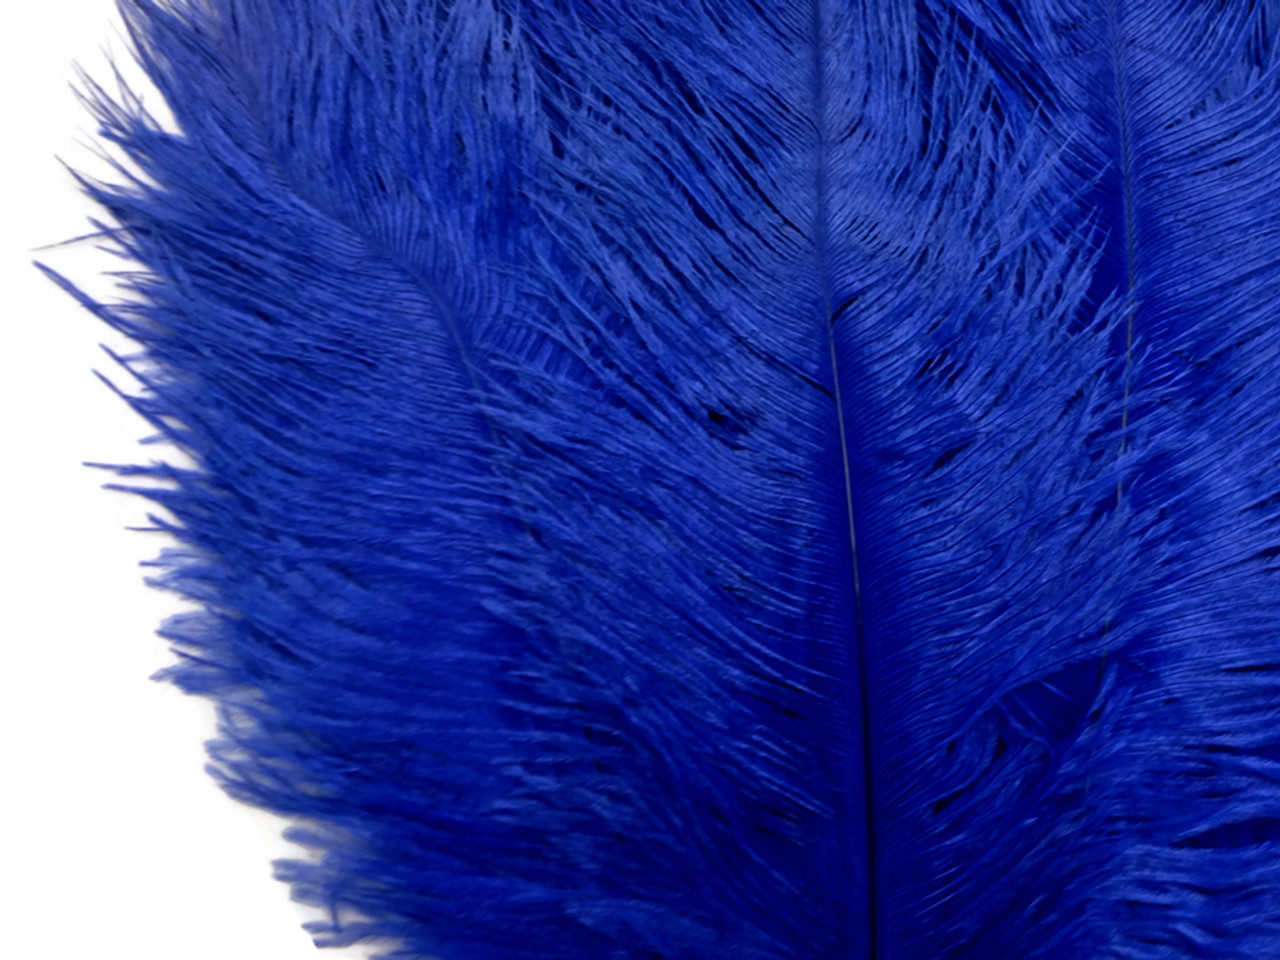 100 Pieces - 11-13 Royal Blue Ostrich Drabs Wholesale Body Feathers (Bulk)  Centerpiece Costume Craft Supply